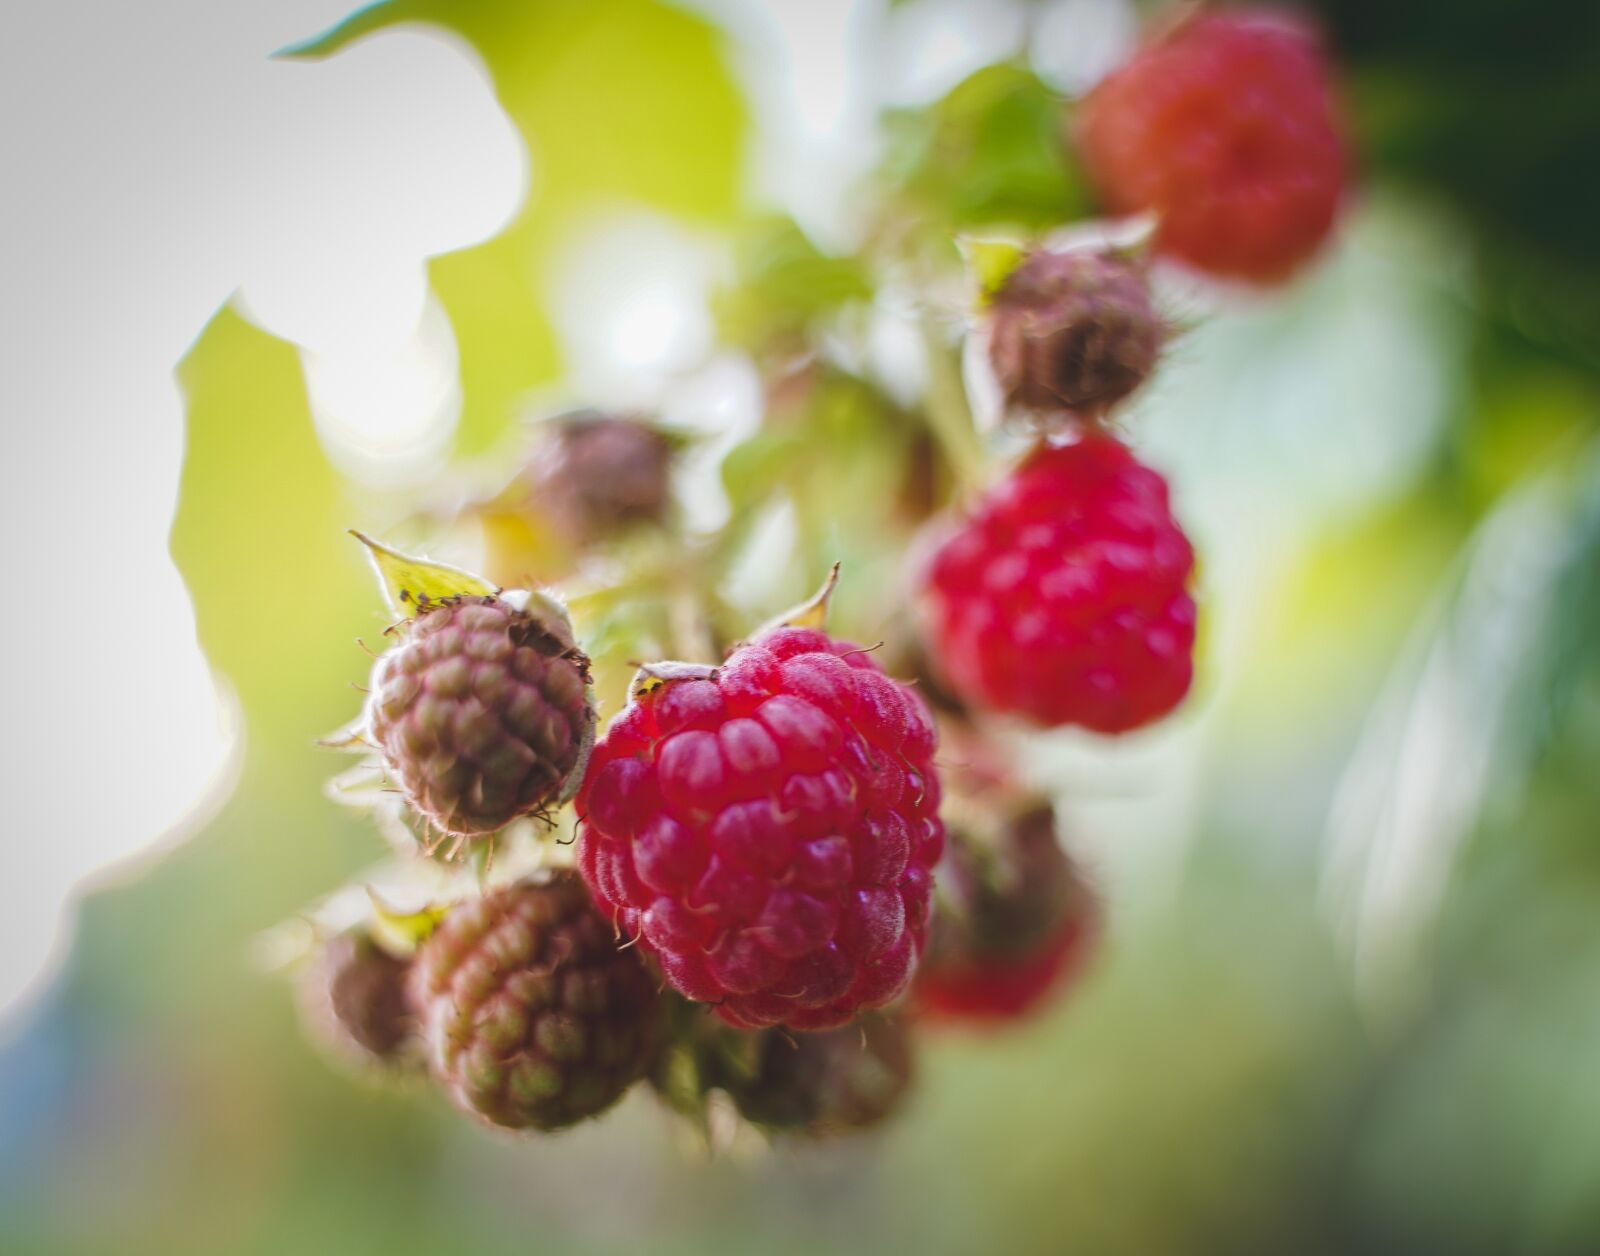 Sony a7 III sample photo. Raspberries, himbeerstrauch, growth mature photography